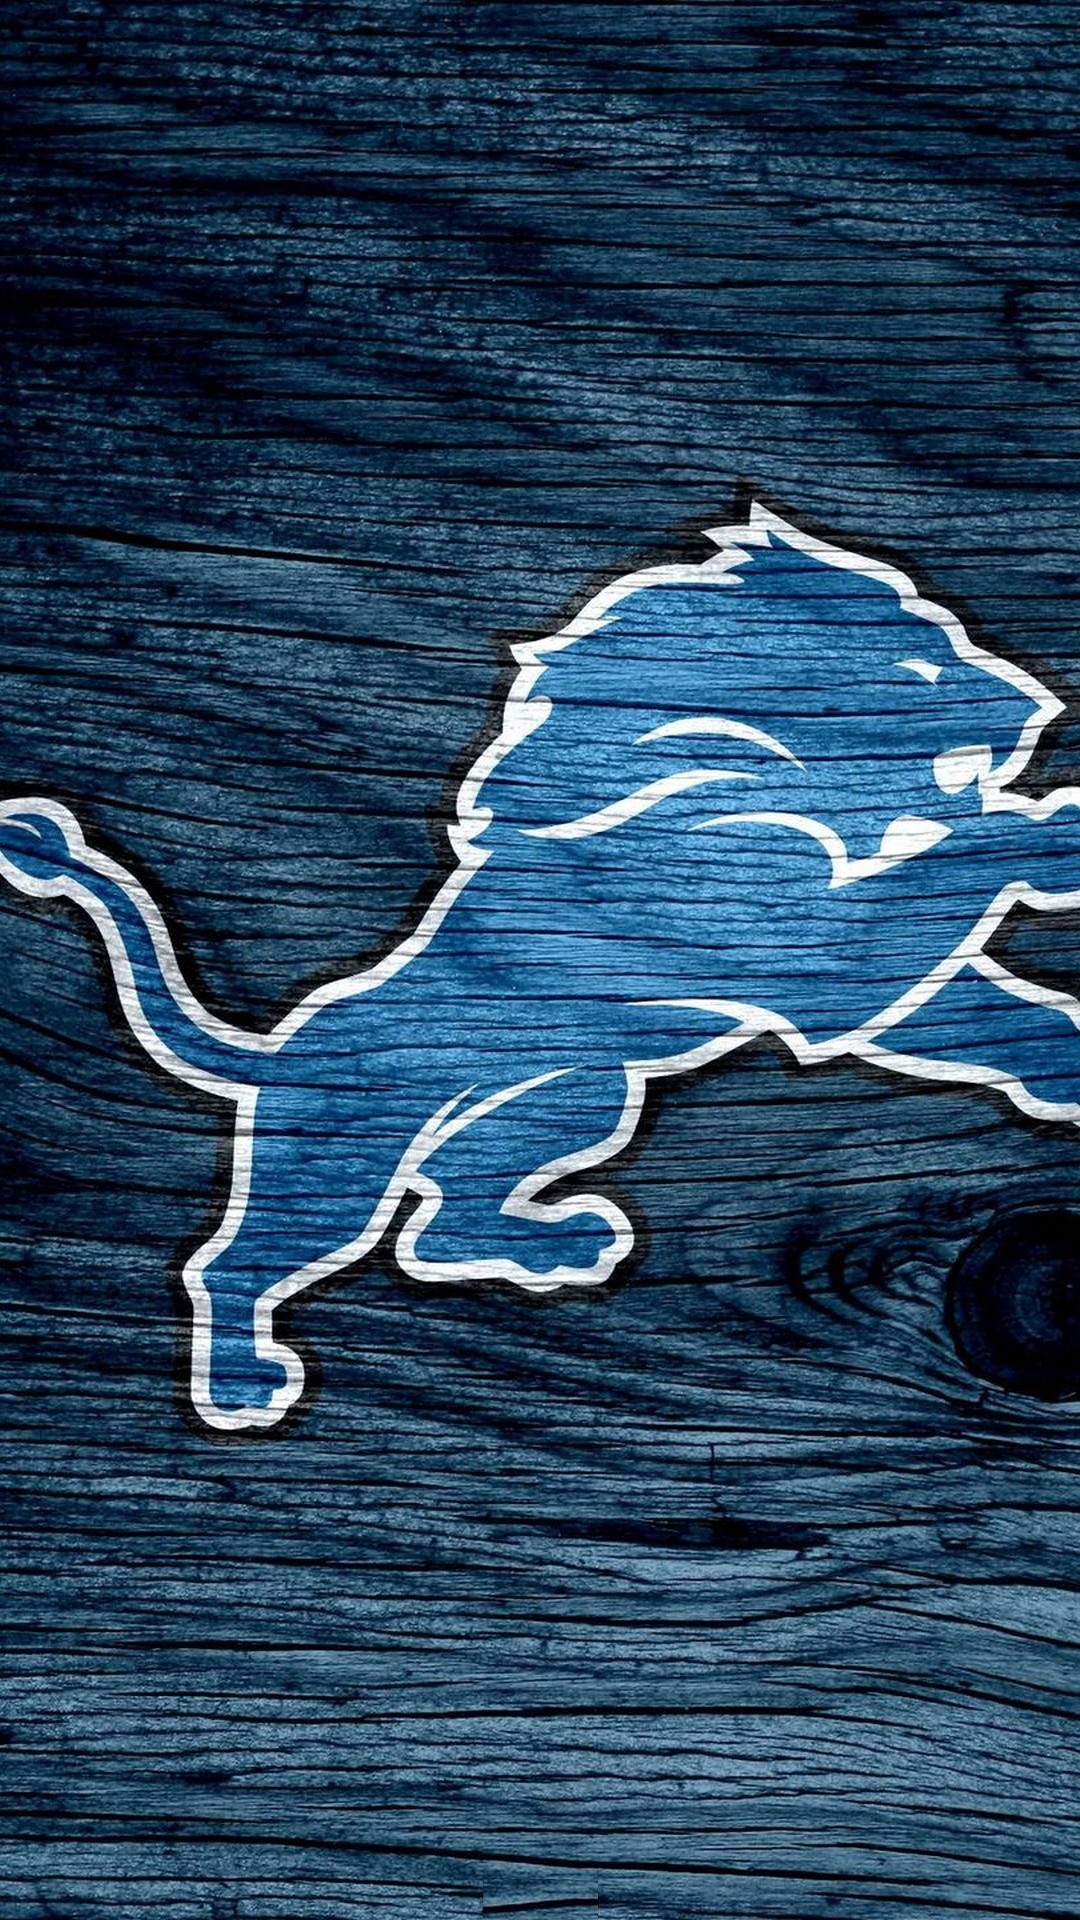 Detroit Lions iPhone Wallpaper Lock Screen with high-resolution 1080x1920 pixel. Download and set as wallpaper for Apple iPhone X, XS Max, XR, 8, 7, 6, SE, iPad, Android